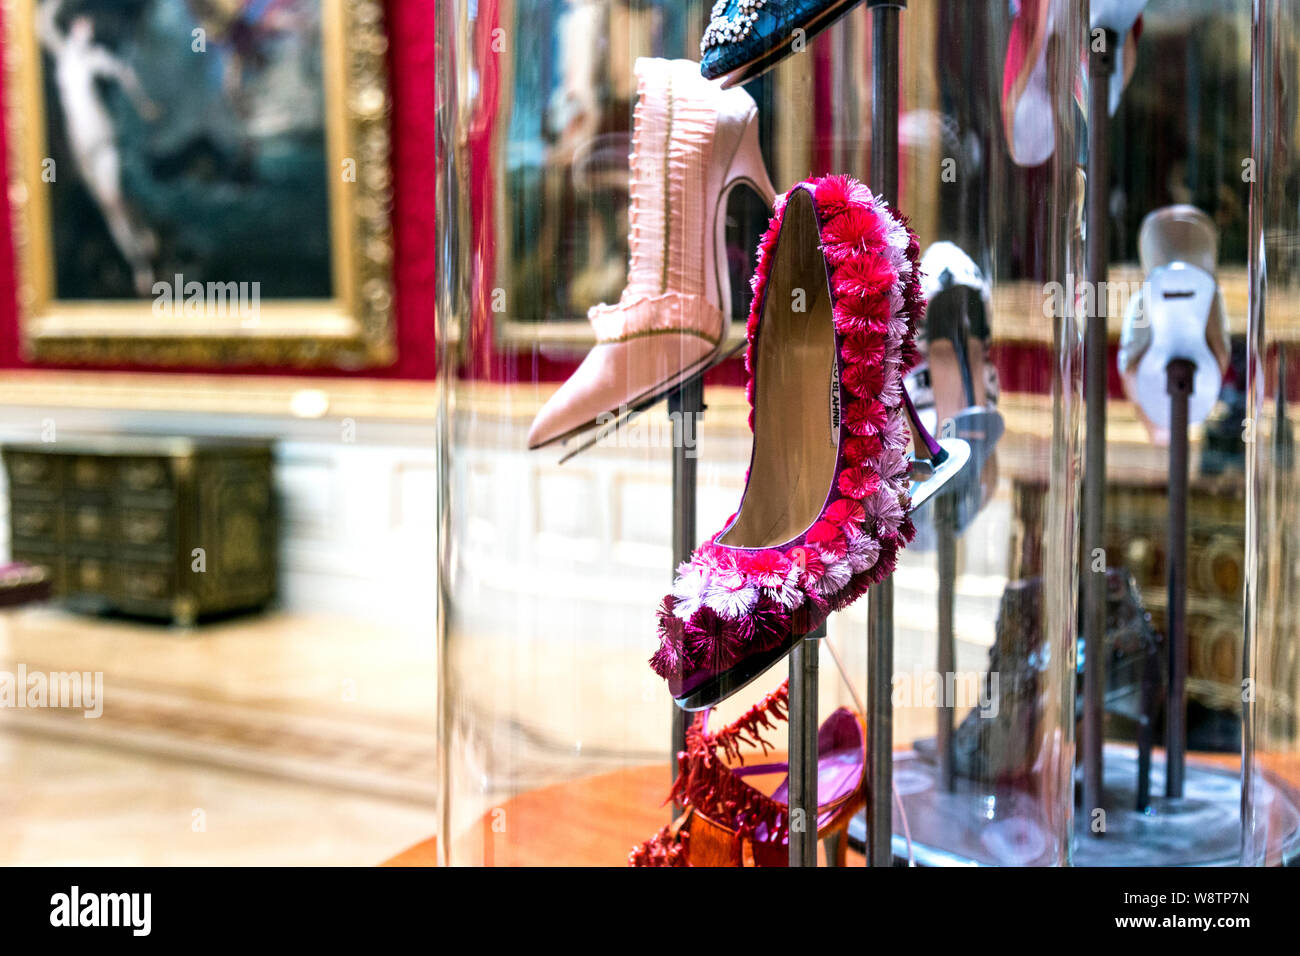 Manolo Blahnik exhibition at the Wallace Collection, London, UK Stock Photo